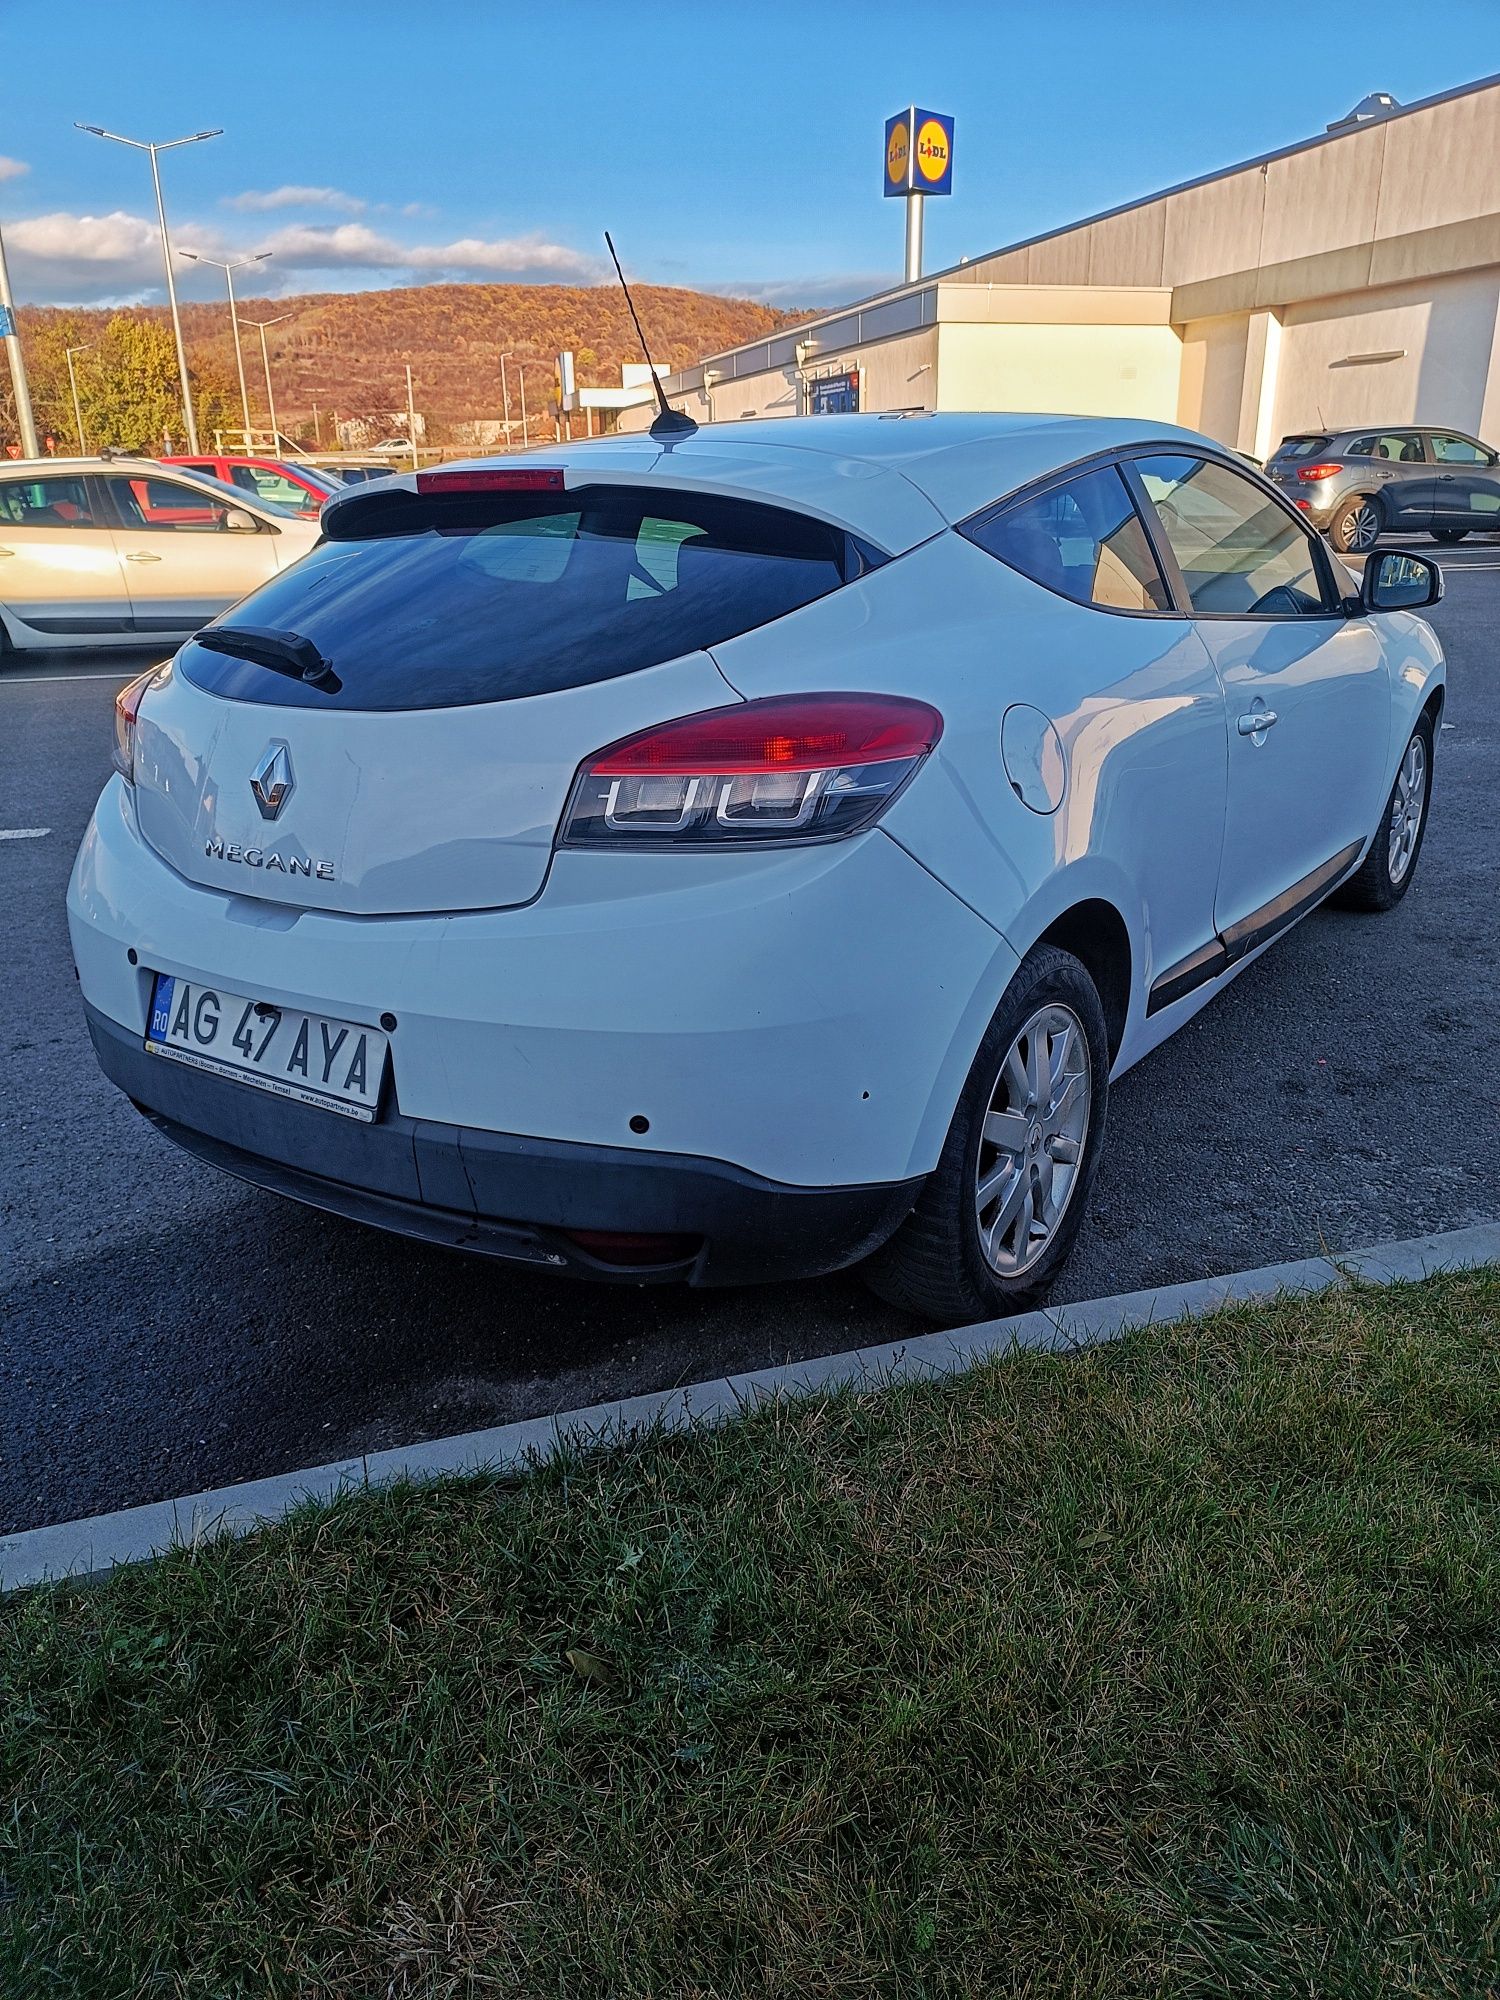 Renault Megane 3 coupe. 1.5dci